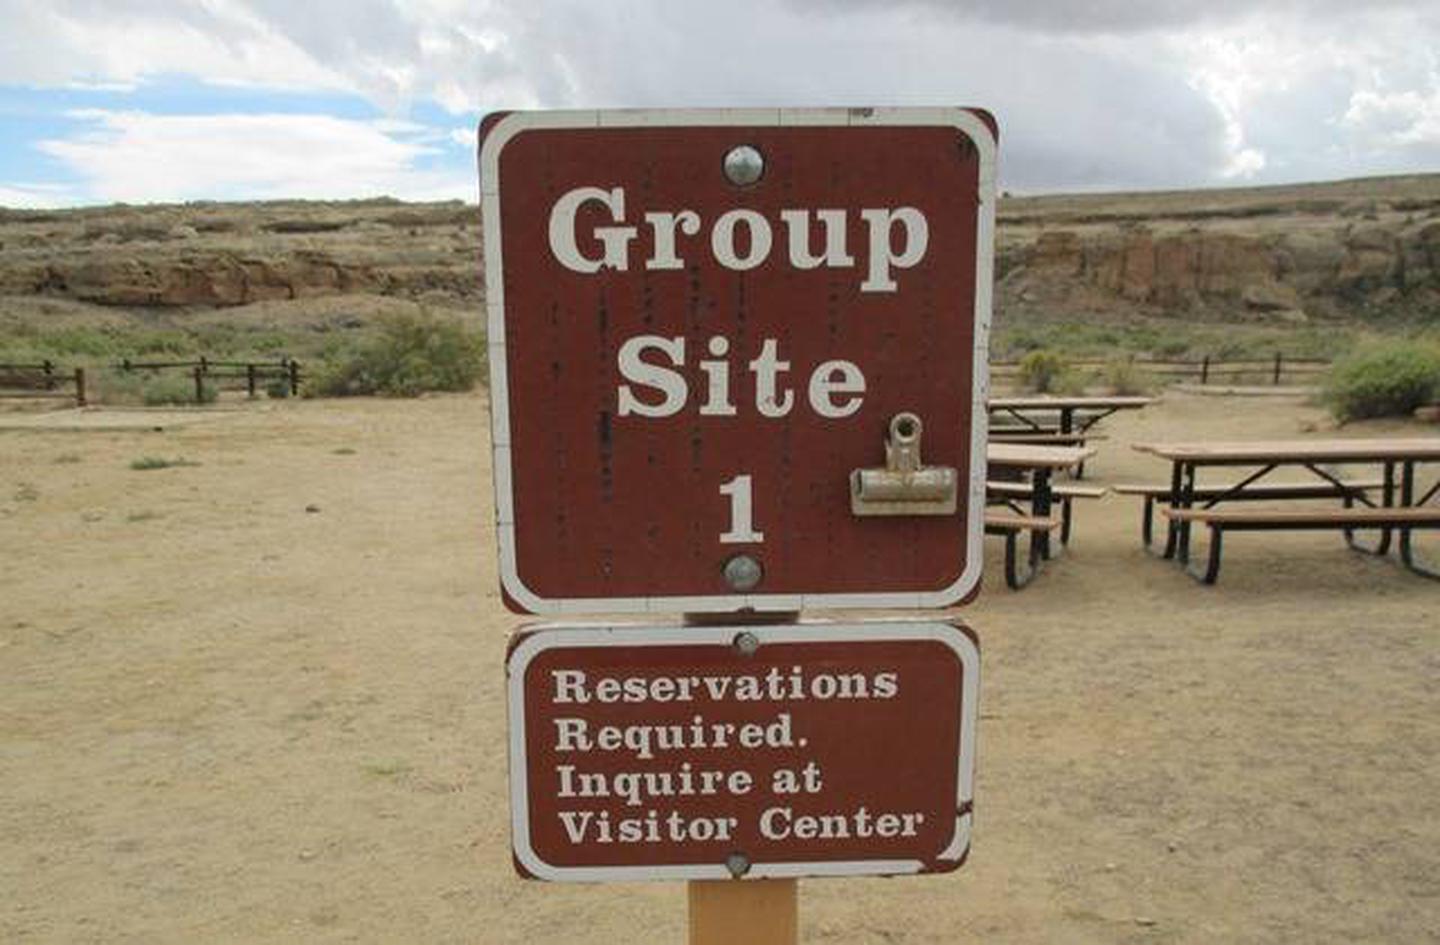 Signage for Group Site 1Signage for Group Site 1. Group leader must check in at the Visitor Center upon arrival. Tents are only permitted in the designated tent pads.